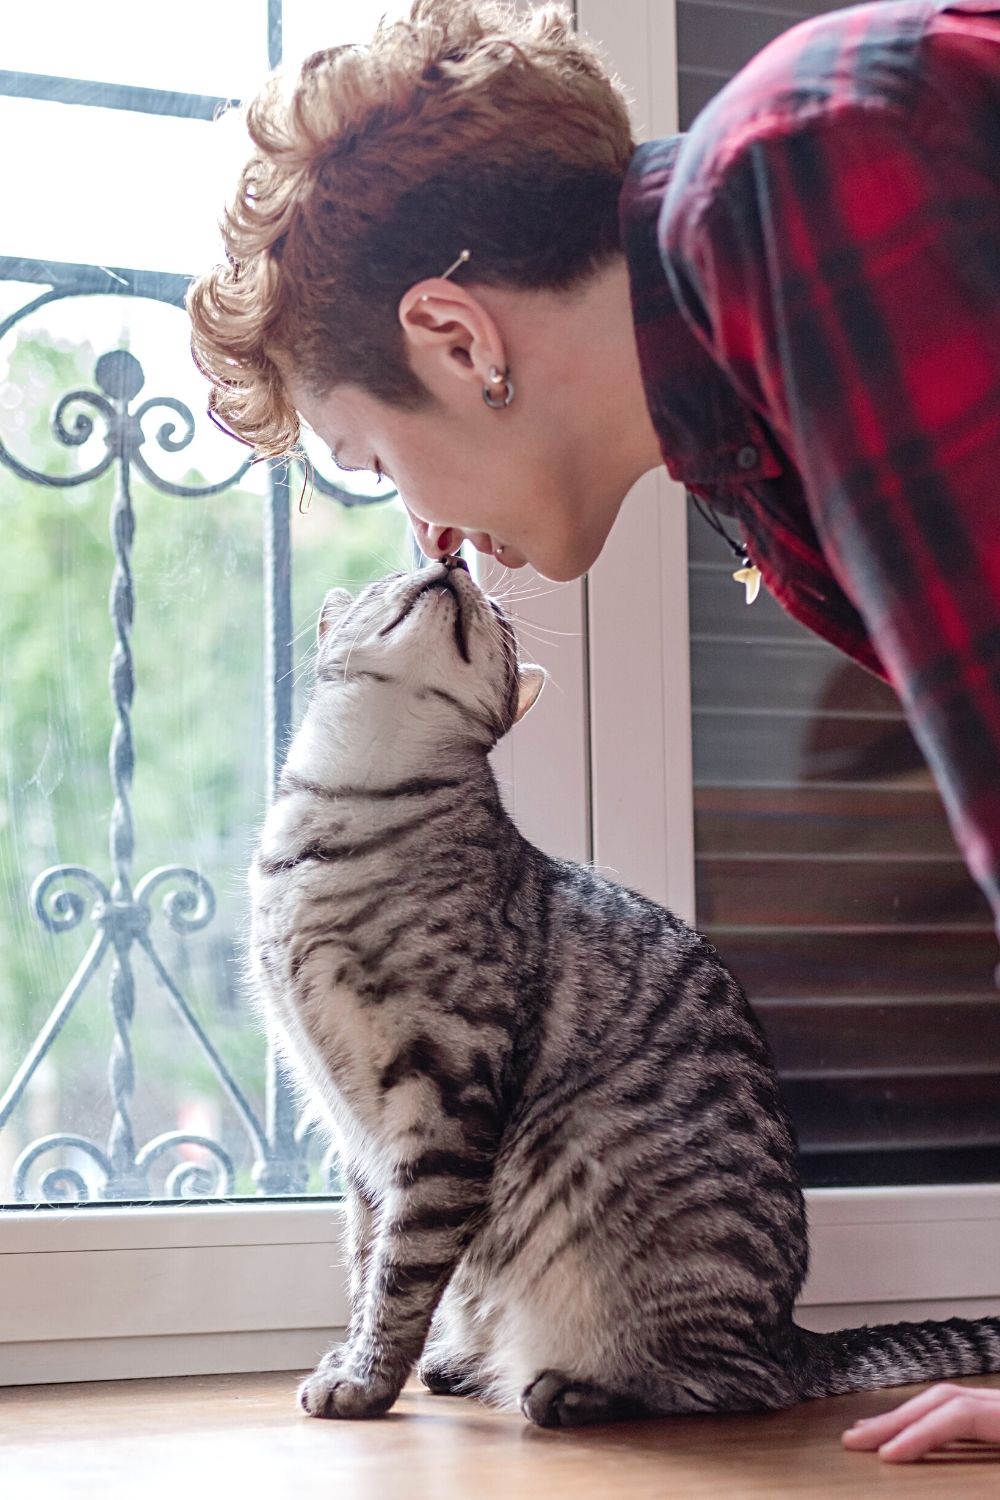 When cats bond with their humans, they give off pheromones